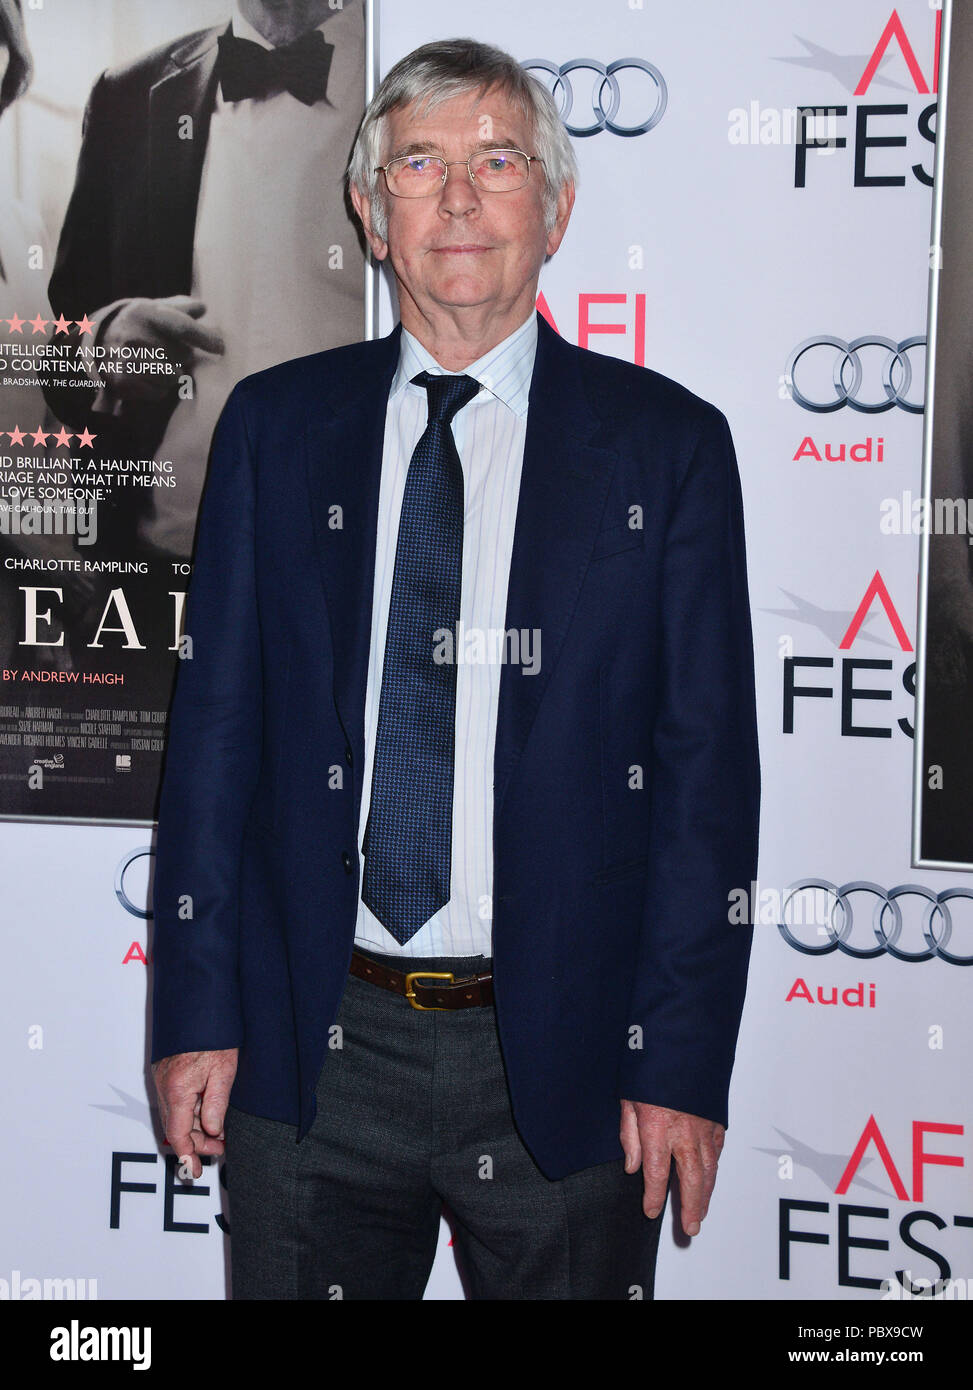 Tom Courtenay 016 at the Tribute to Charlotte Rampling and Tom Courtenay at the AFI Film Festival, 45 years ,  at the TCL Chinese Theatre in Los Angeles. November 11, 2015.Tom Courtenay 016 ------------- Red Carpet Event, Vertical, USA, Film Industry, Celebrities,  Photography, Bestof, Arts Culture and Entertainment, Topix Celebrities fashion /  Vertical, Best of, Event in Hollywood Life - California,  Red Carpet and backstage, USA, Film Industry, Celebrities,  movie celebrities, TV celebrities, Music celebrities, Photography, Bestof, Arts Culture and Entertainment,  Topix, Three Quarters, ver Stock Photo